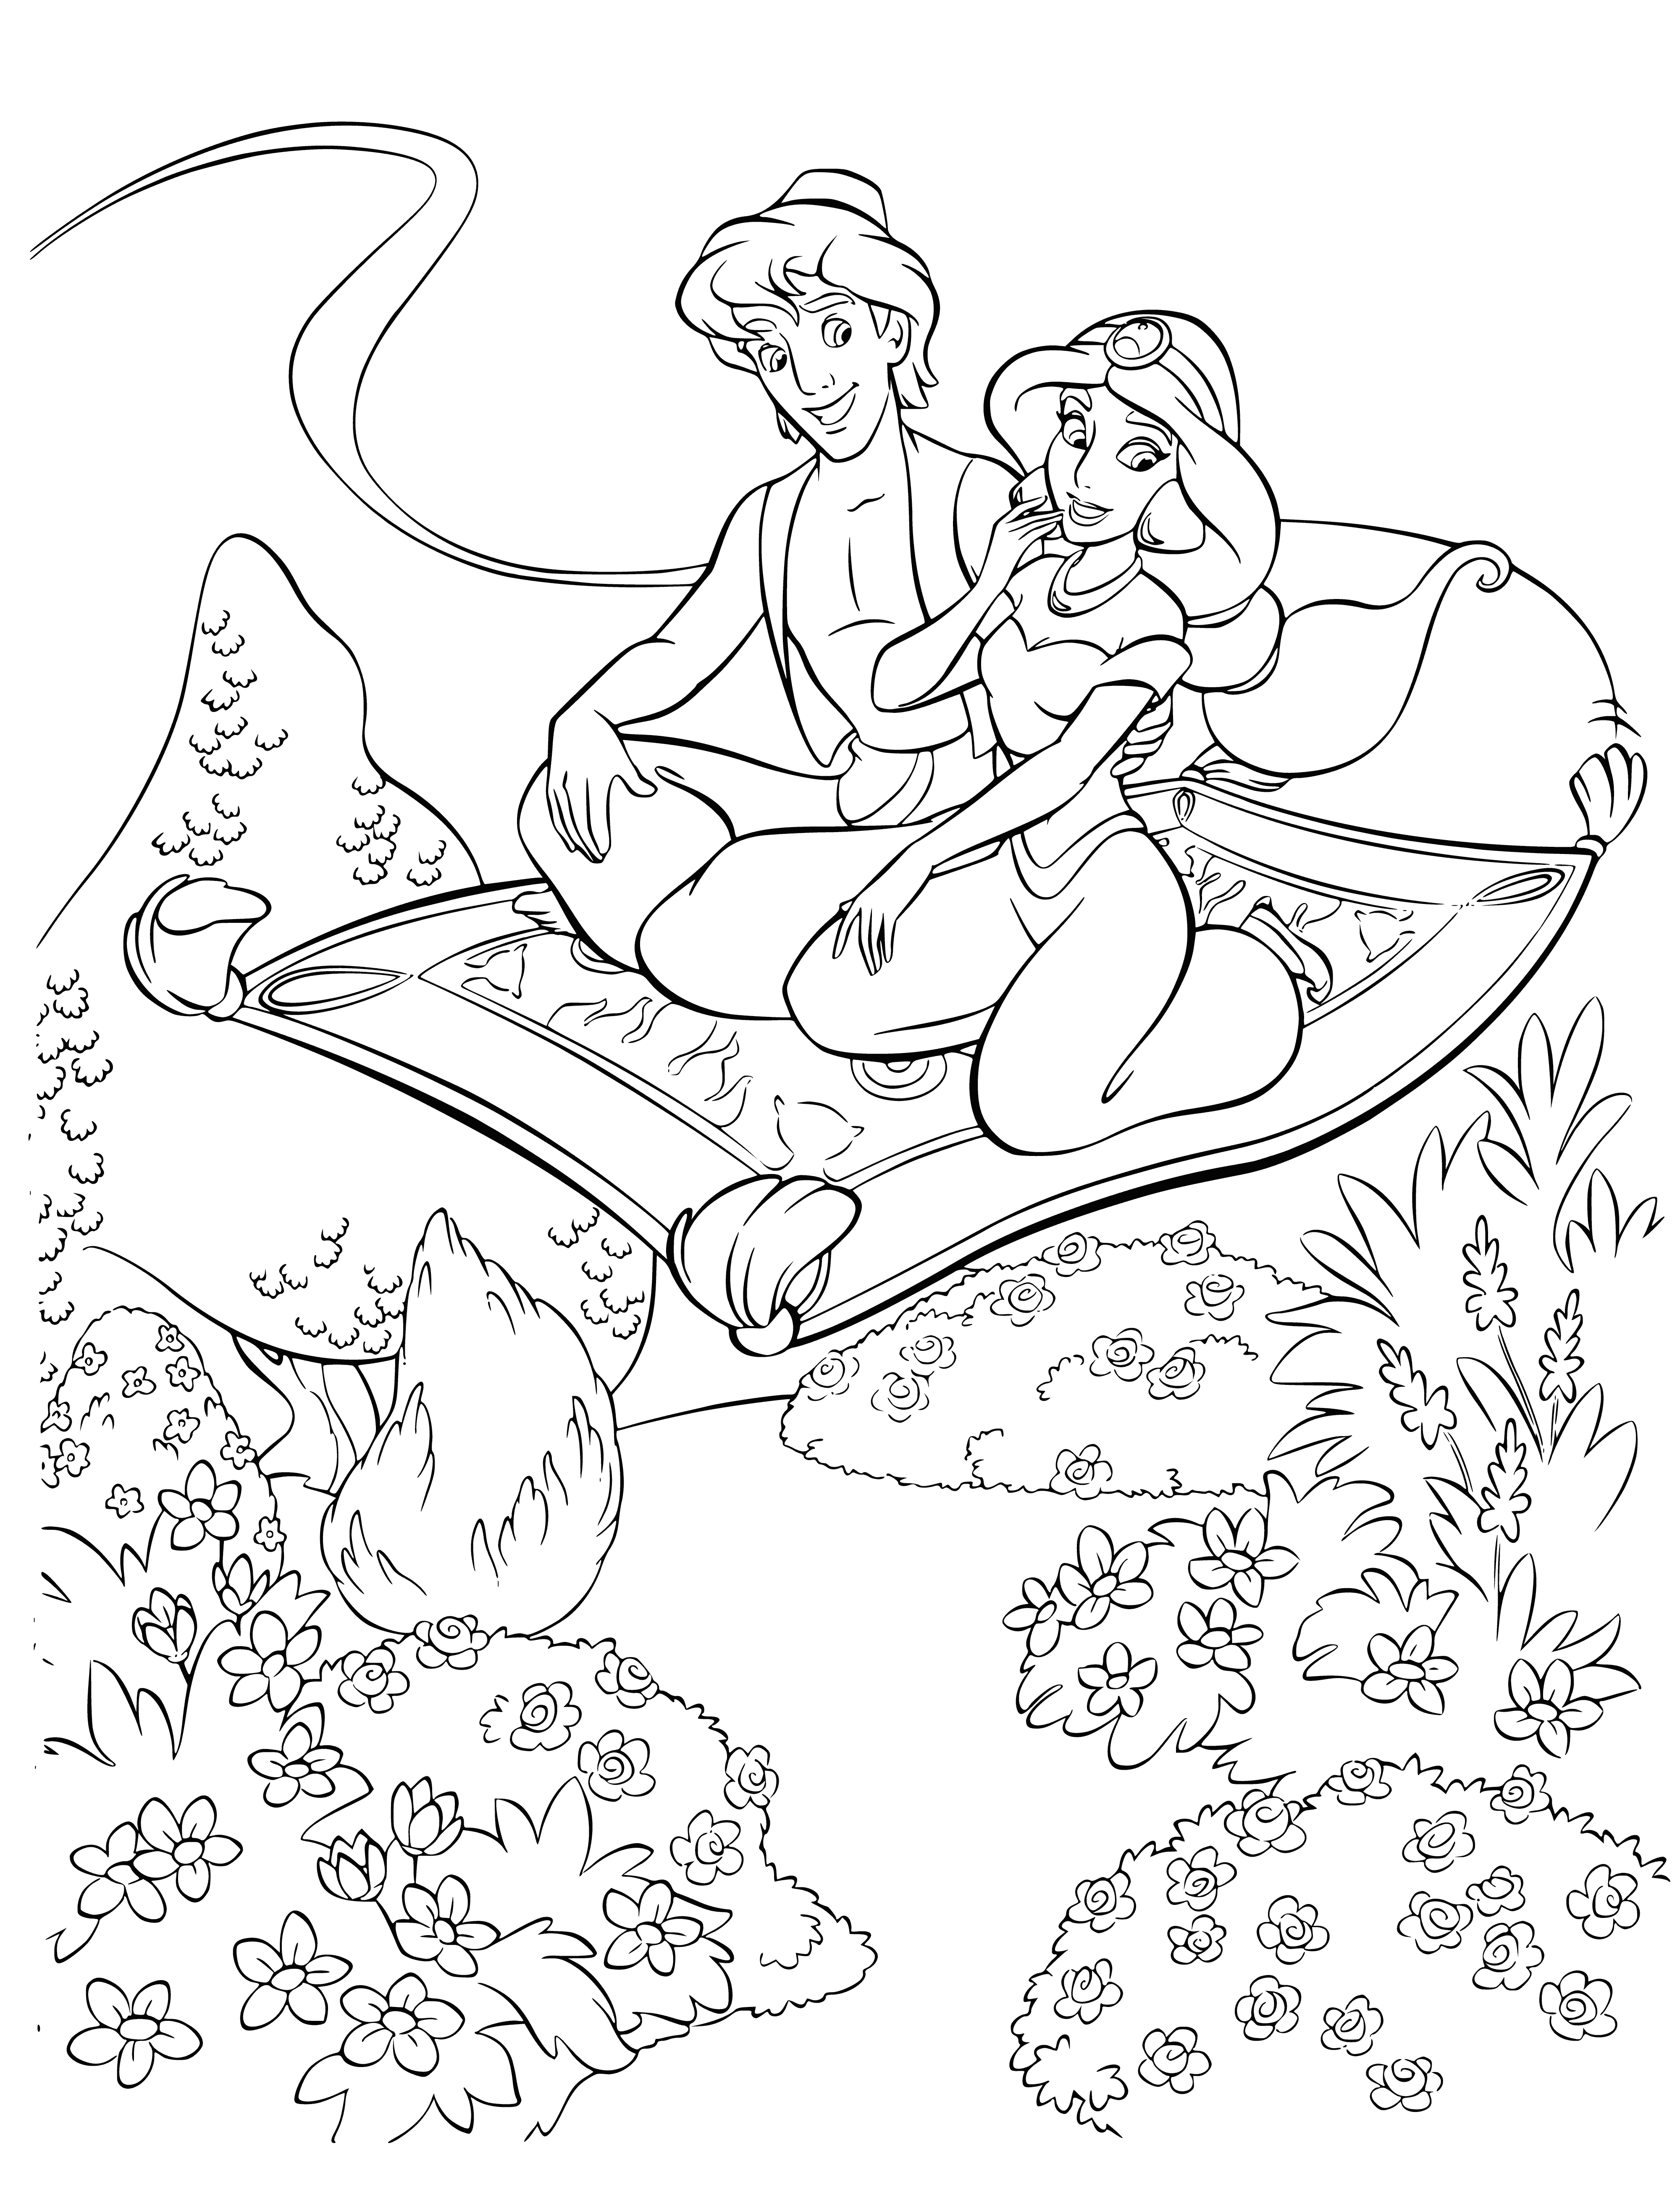 coloring page: Aladdin & Jasmine ride a carpet through the air, surrounded by barrels of gold. #Disney #magic #1001nights